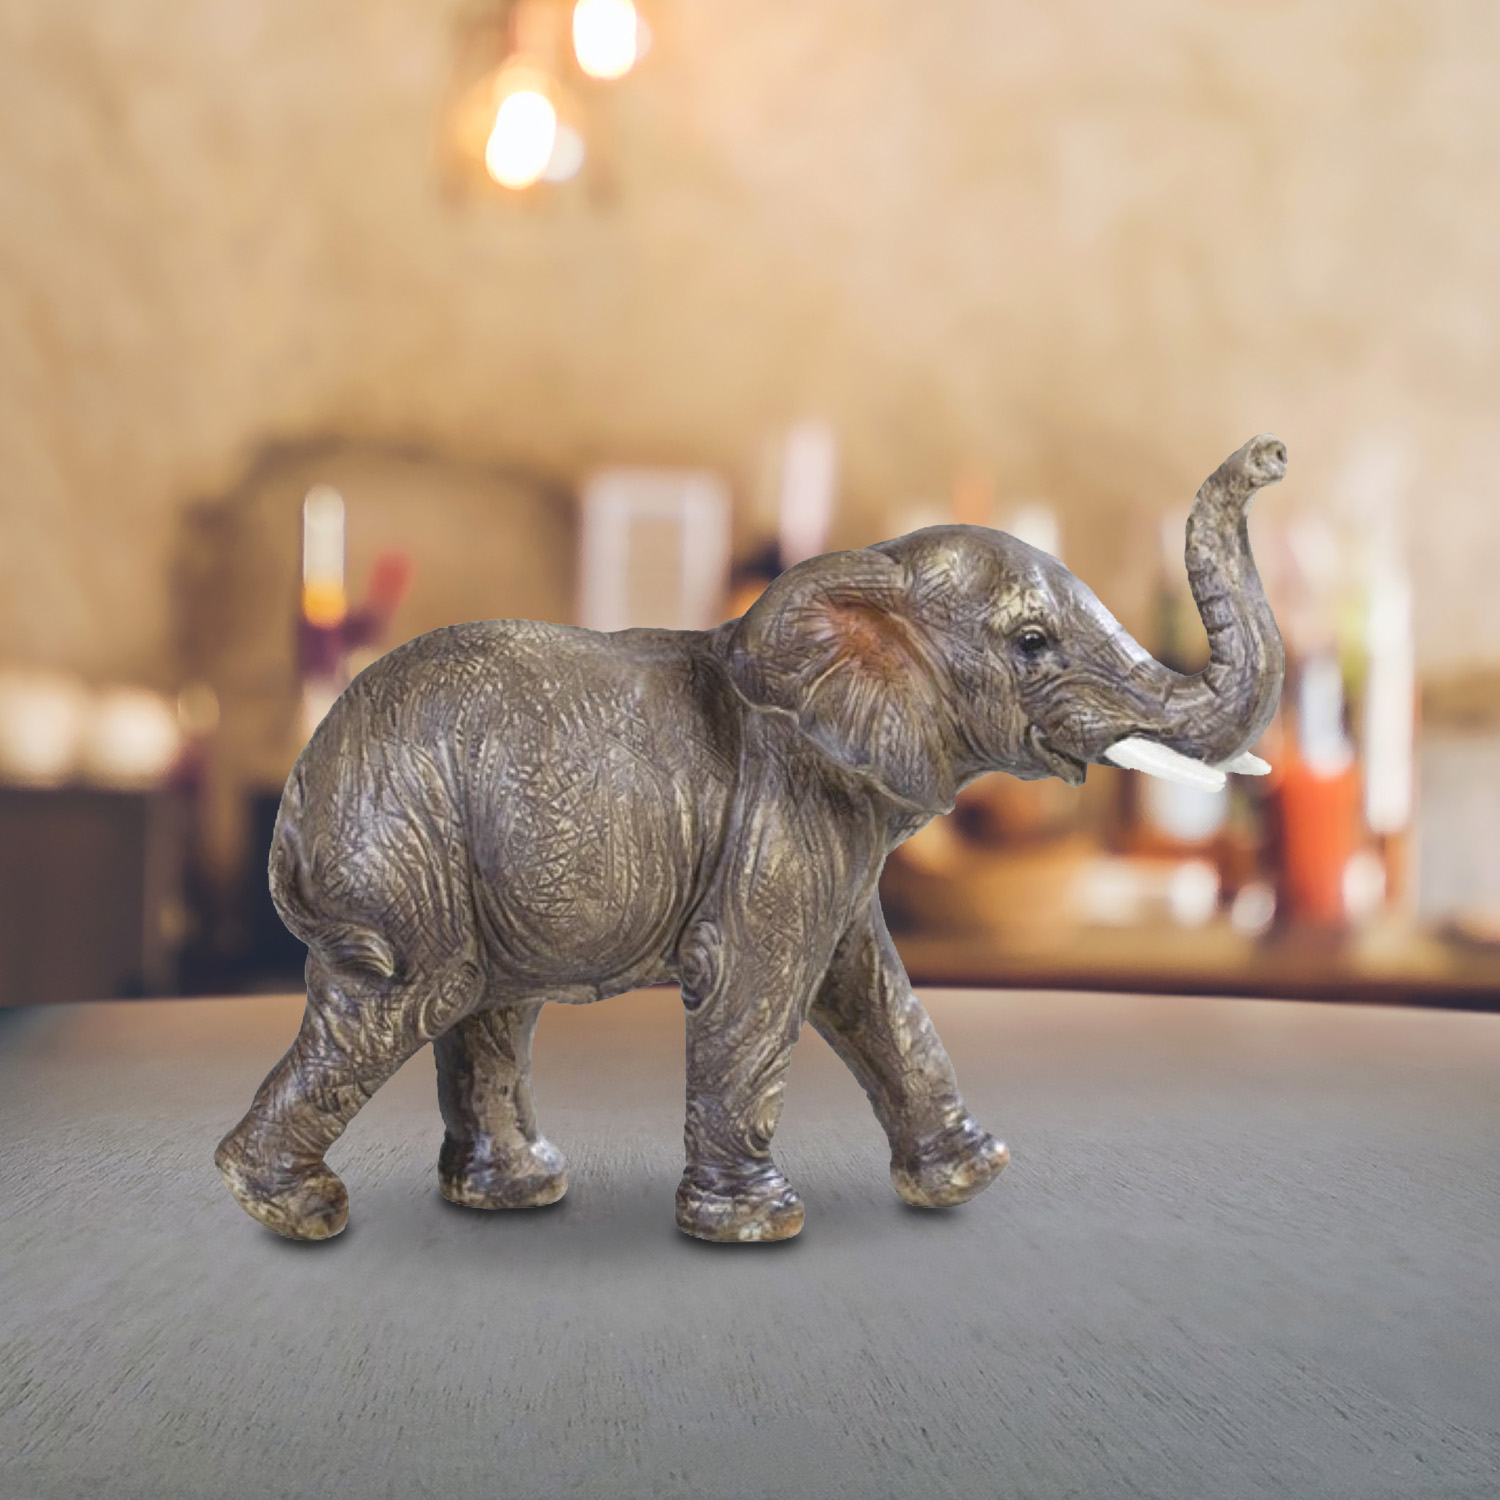 

6"w Wildlife Baby Elephant Cub With Trunk Up Figurine Statue Ornament Home/room Decor And Perfect Gift Ideas For House Warming, Holidays And Birthdays Great Collectible Addition